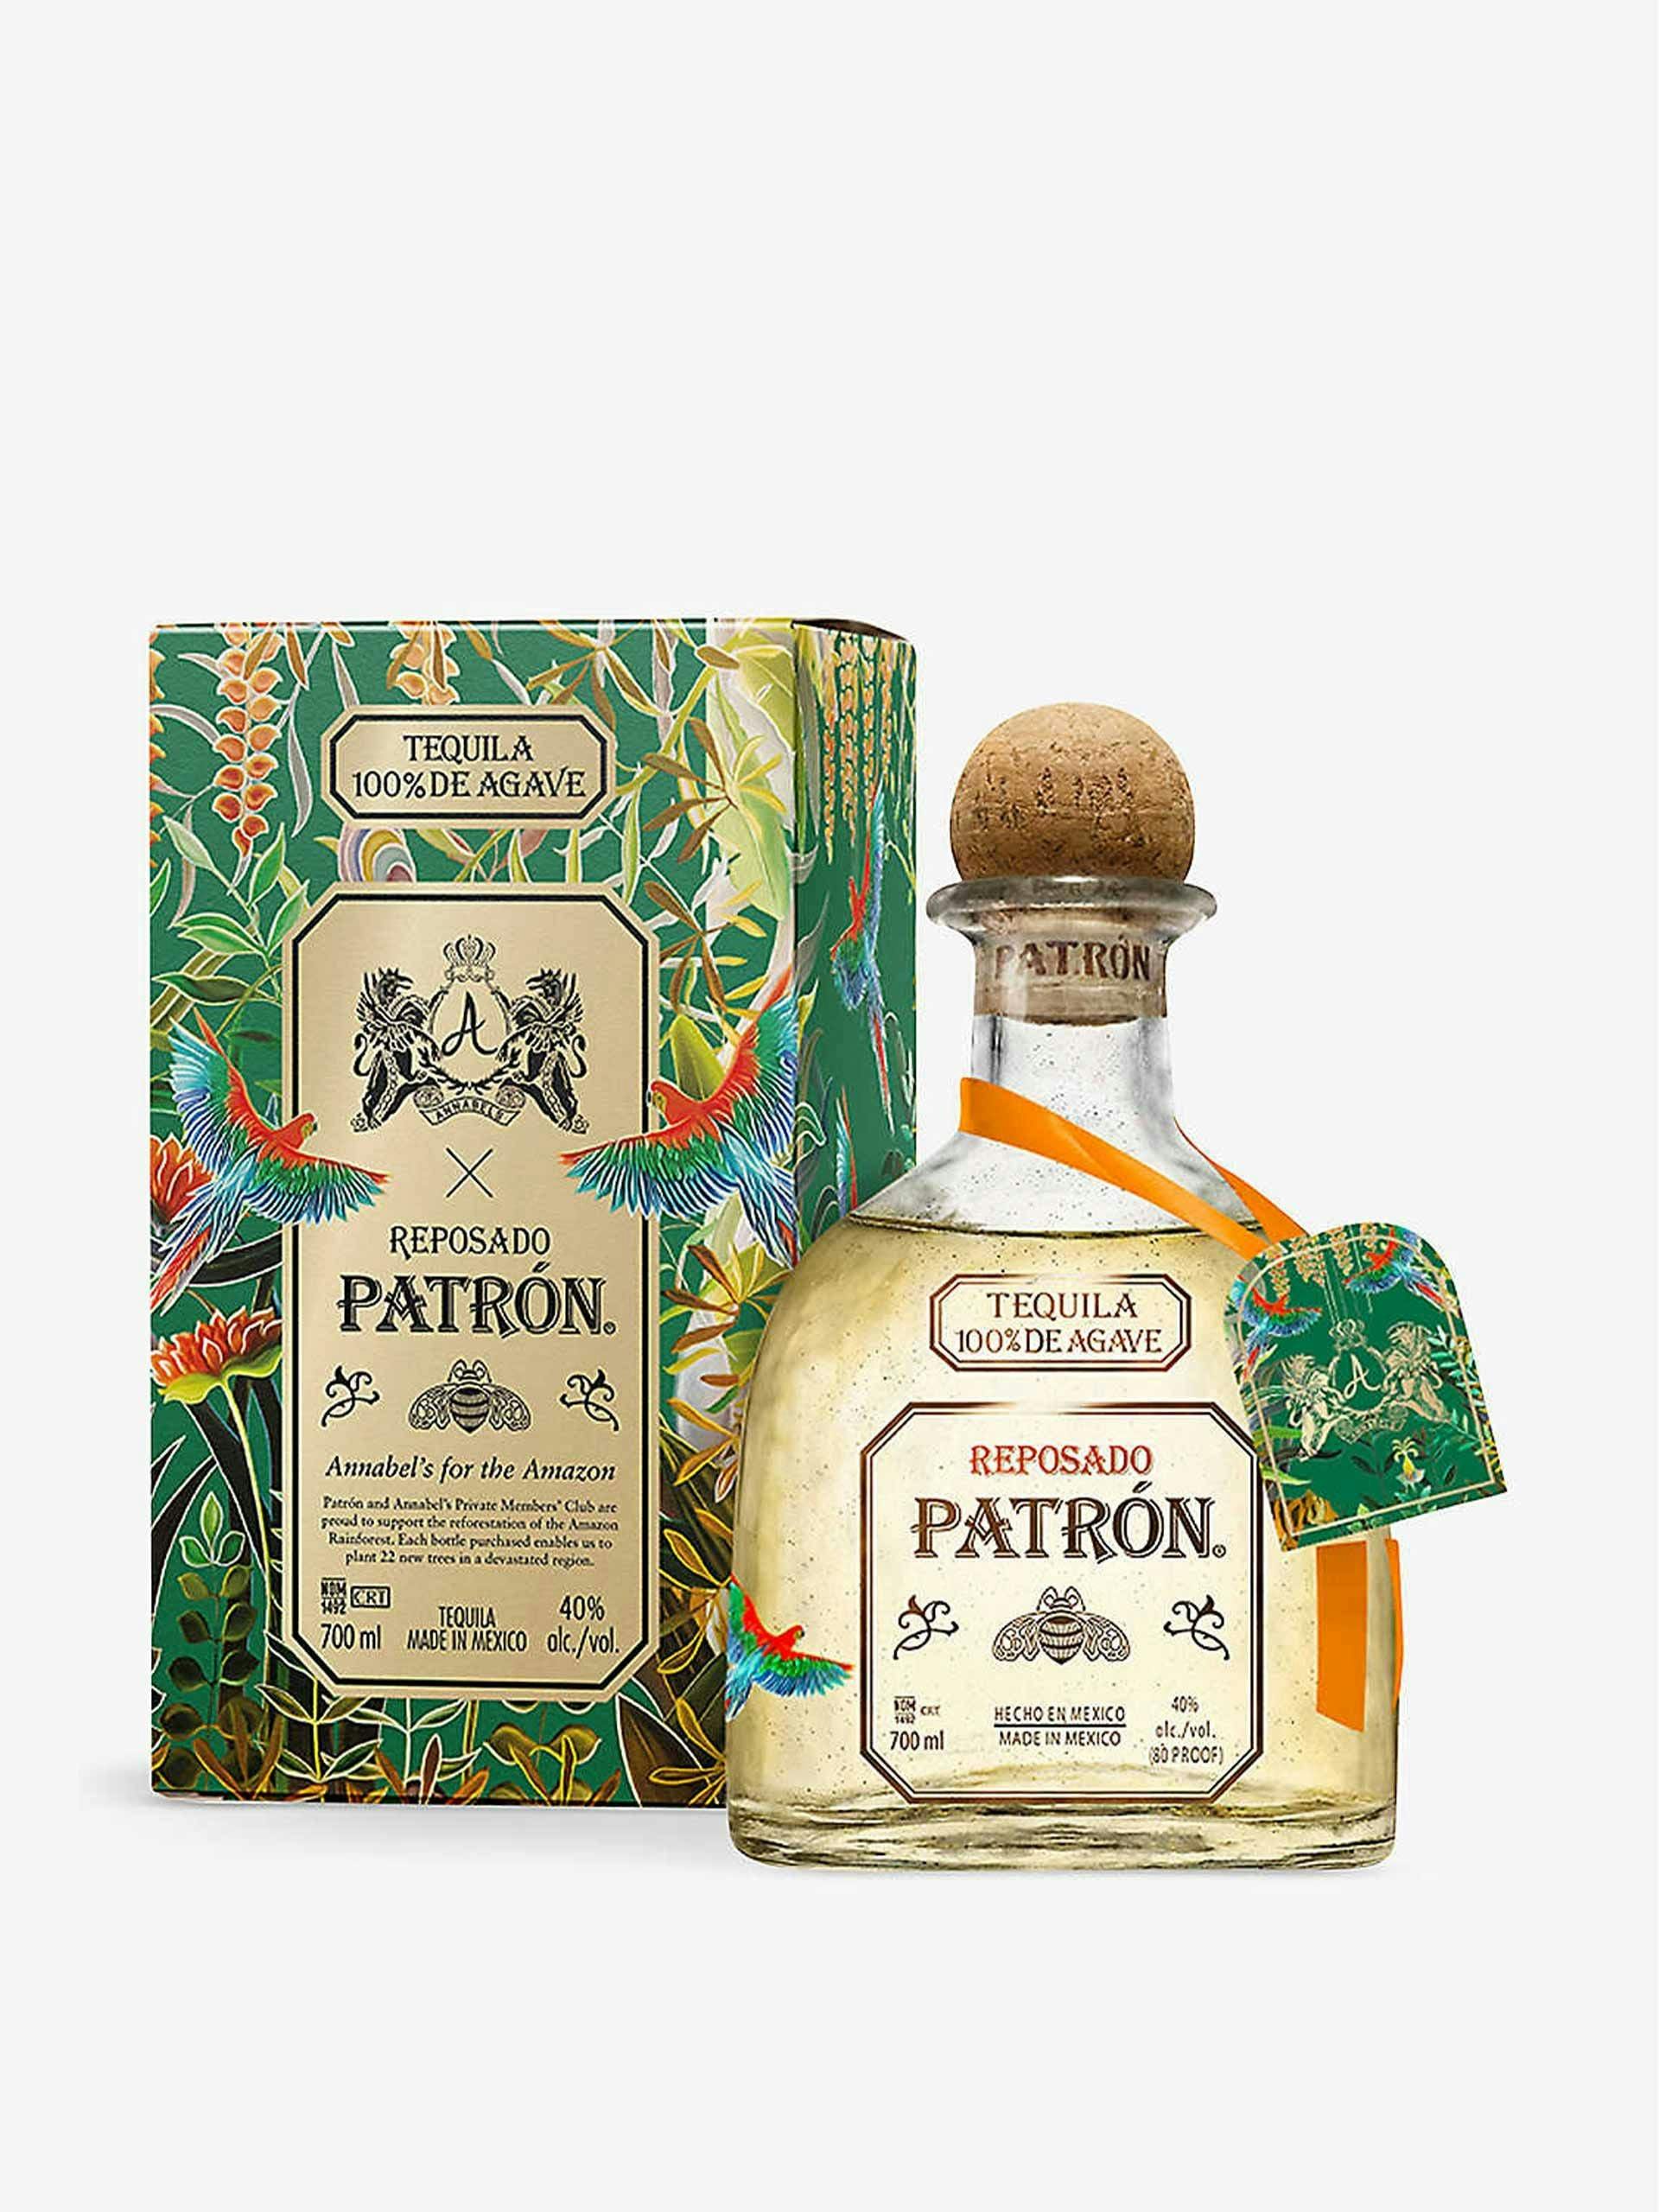 Limited edition tequila